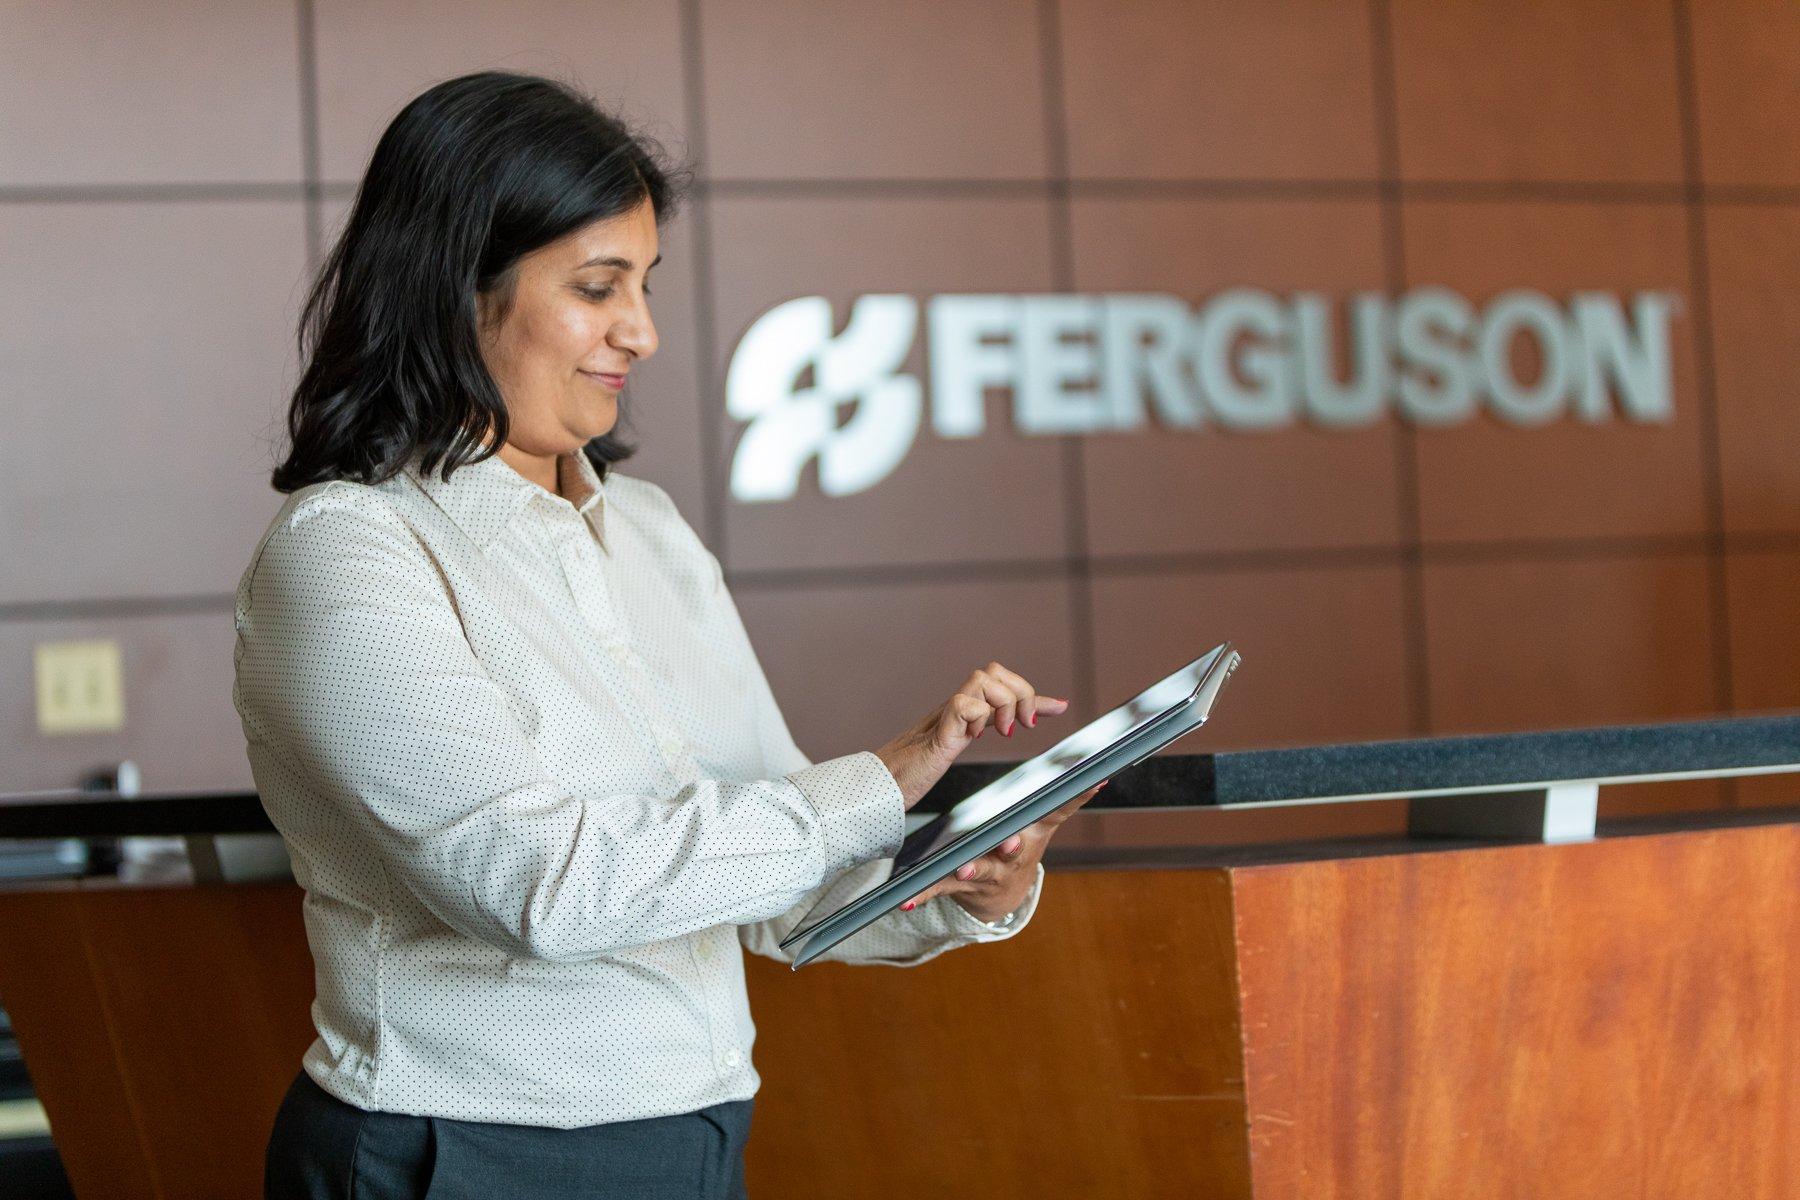 A Ferguson associate types on a tablet in front of a counter.